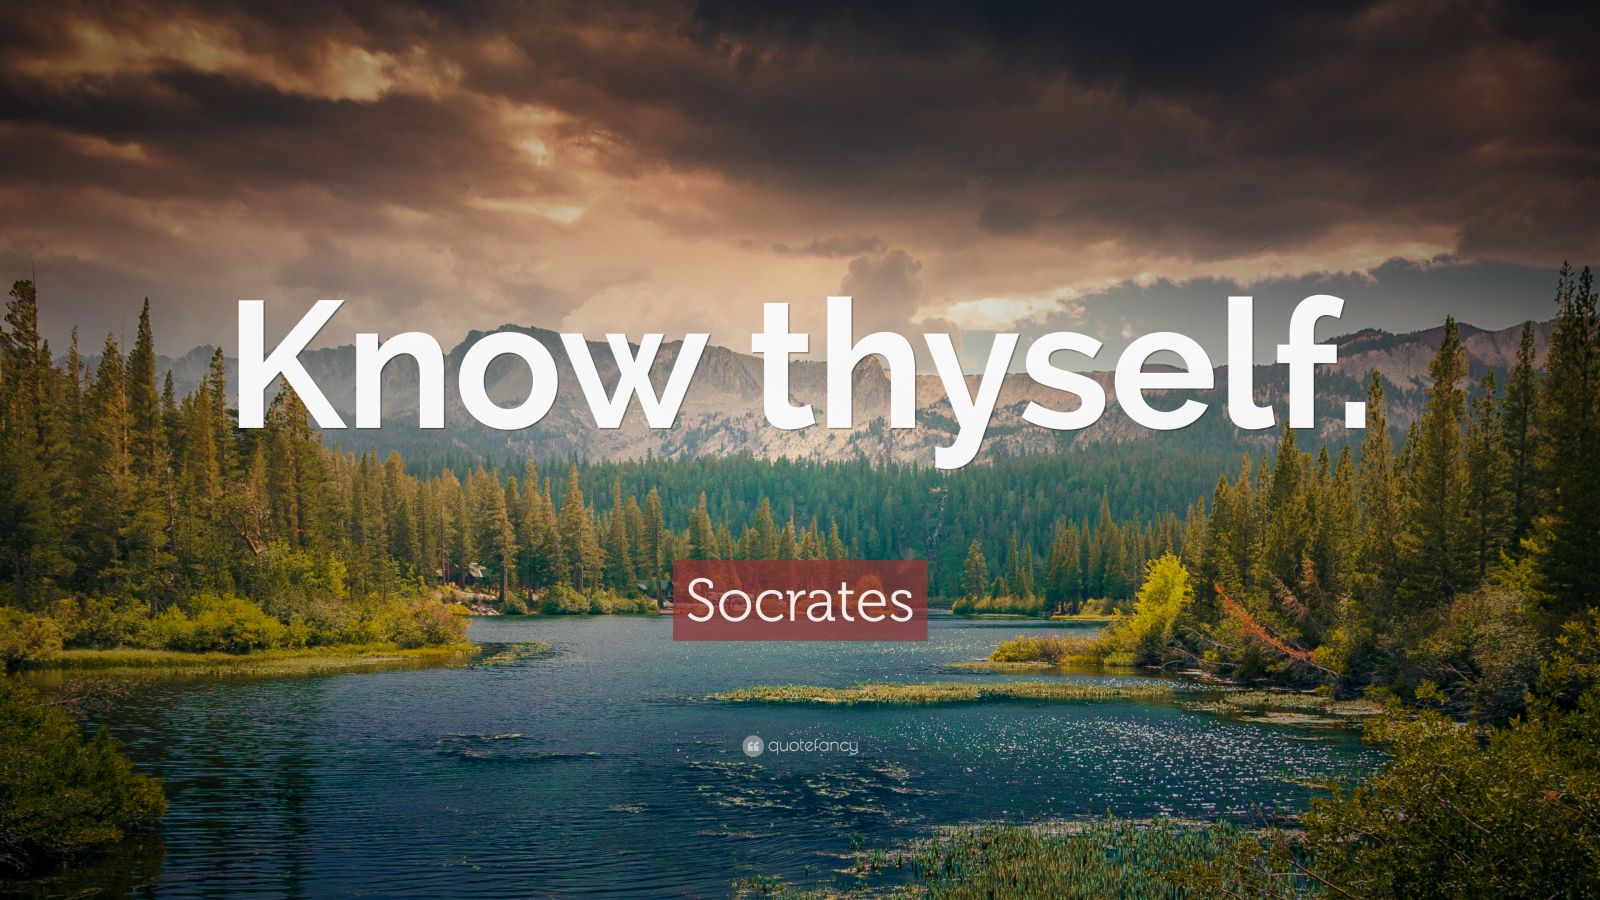 Socrates Quote: “Know thyself.” (32 wallpapers) - Quotefancy